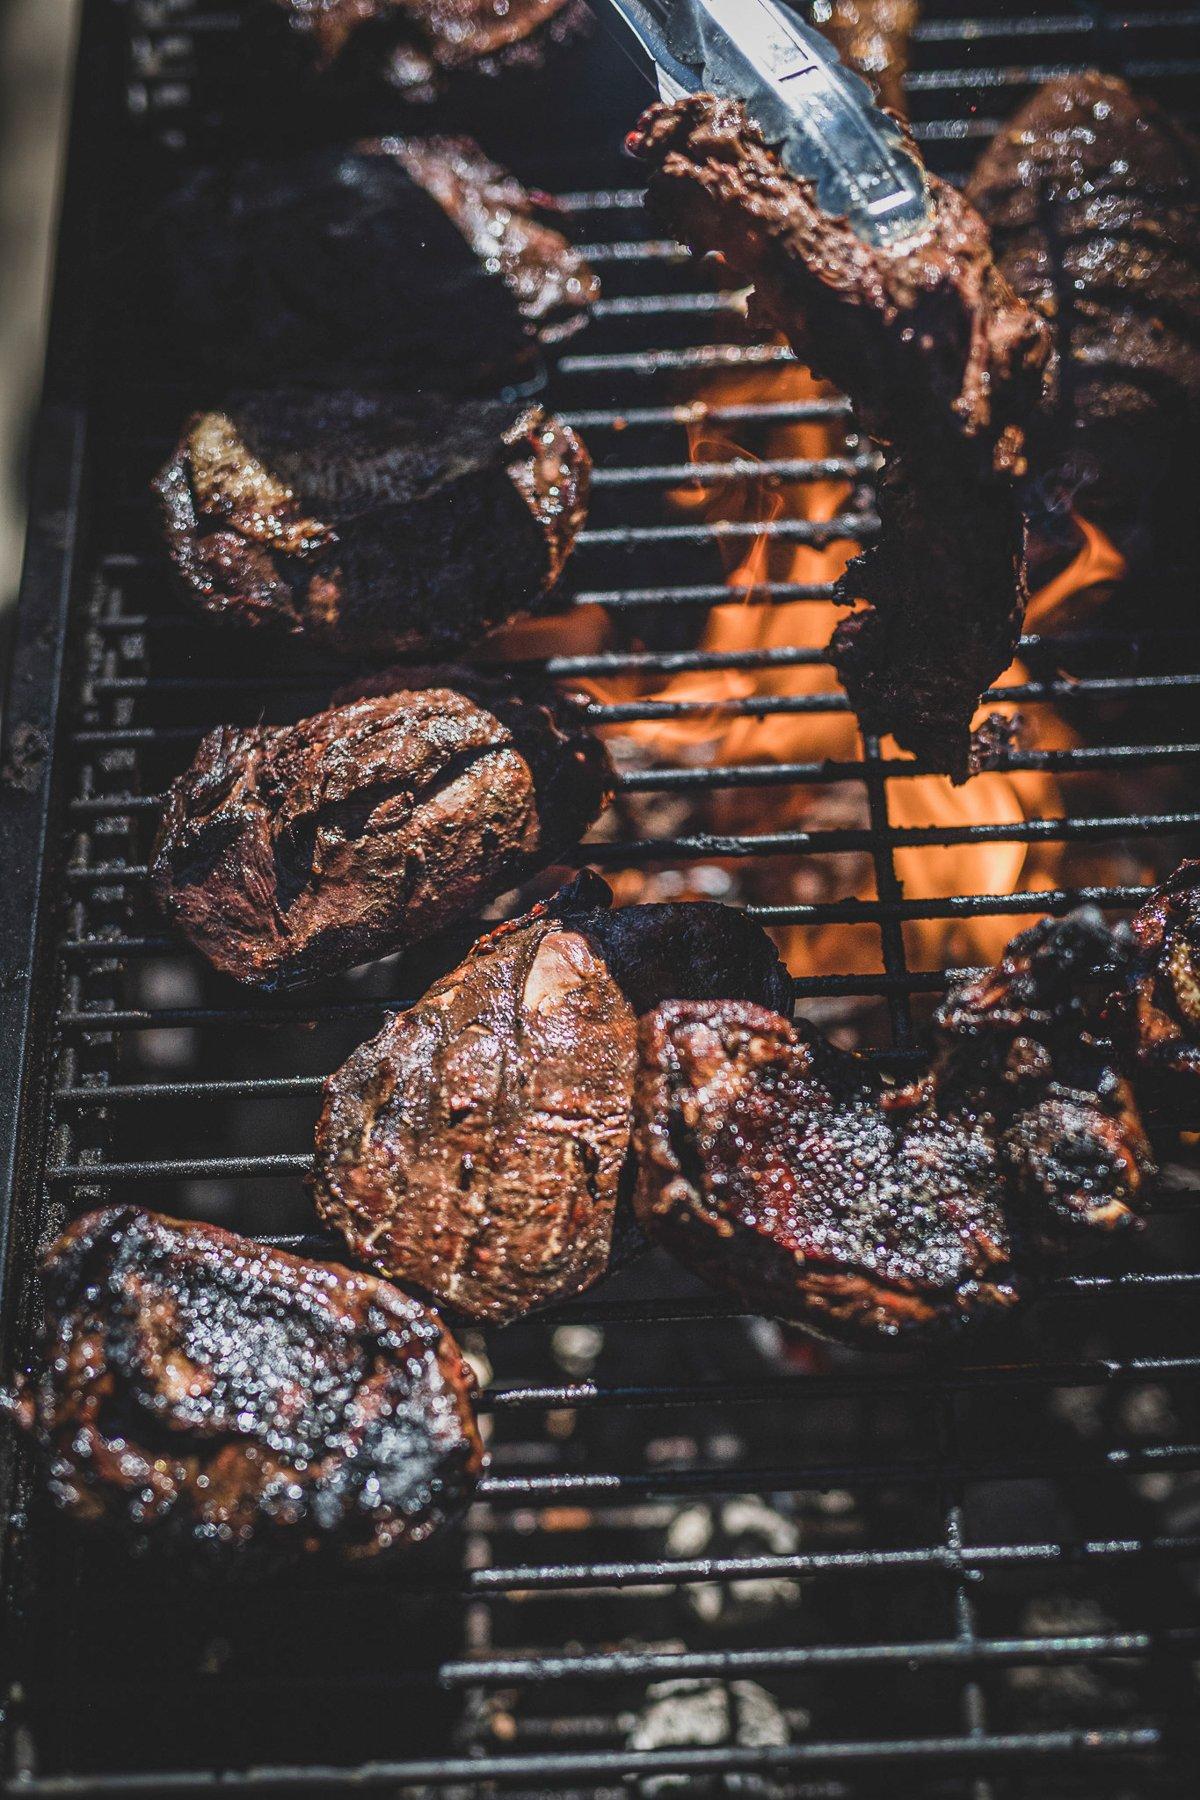 Take care not to grill over medium-rare doneness. Photo by Grit Media